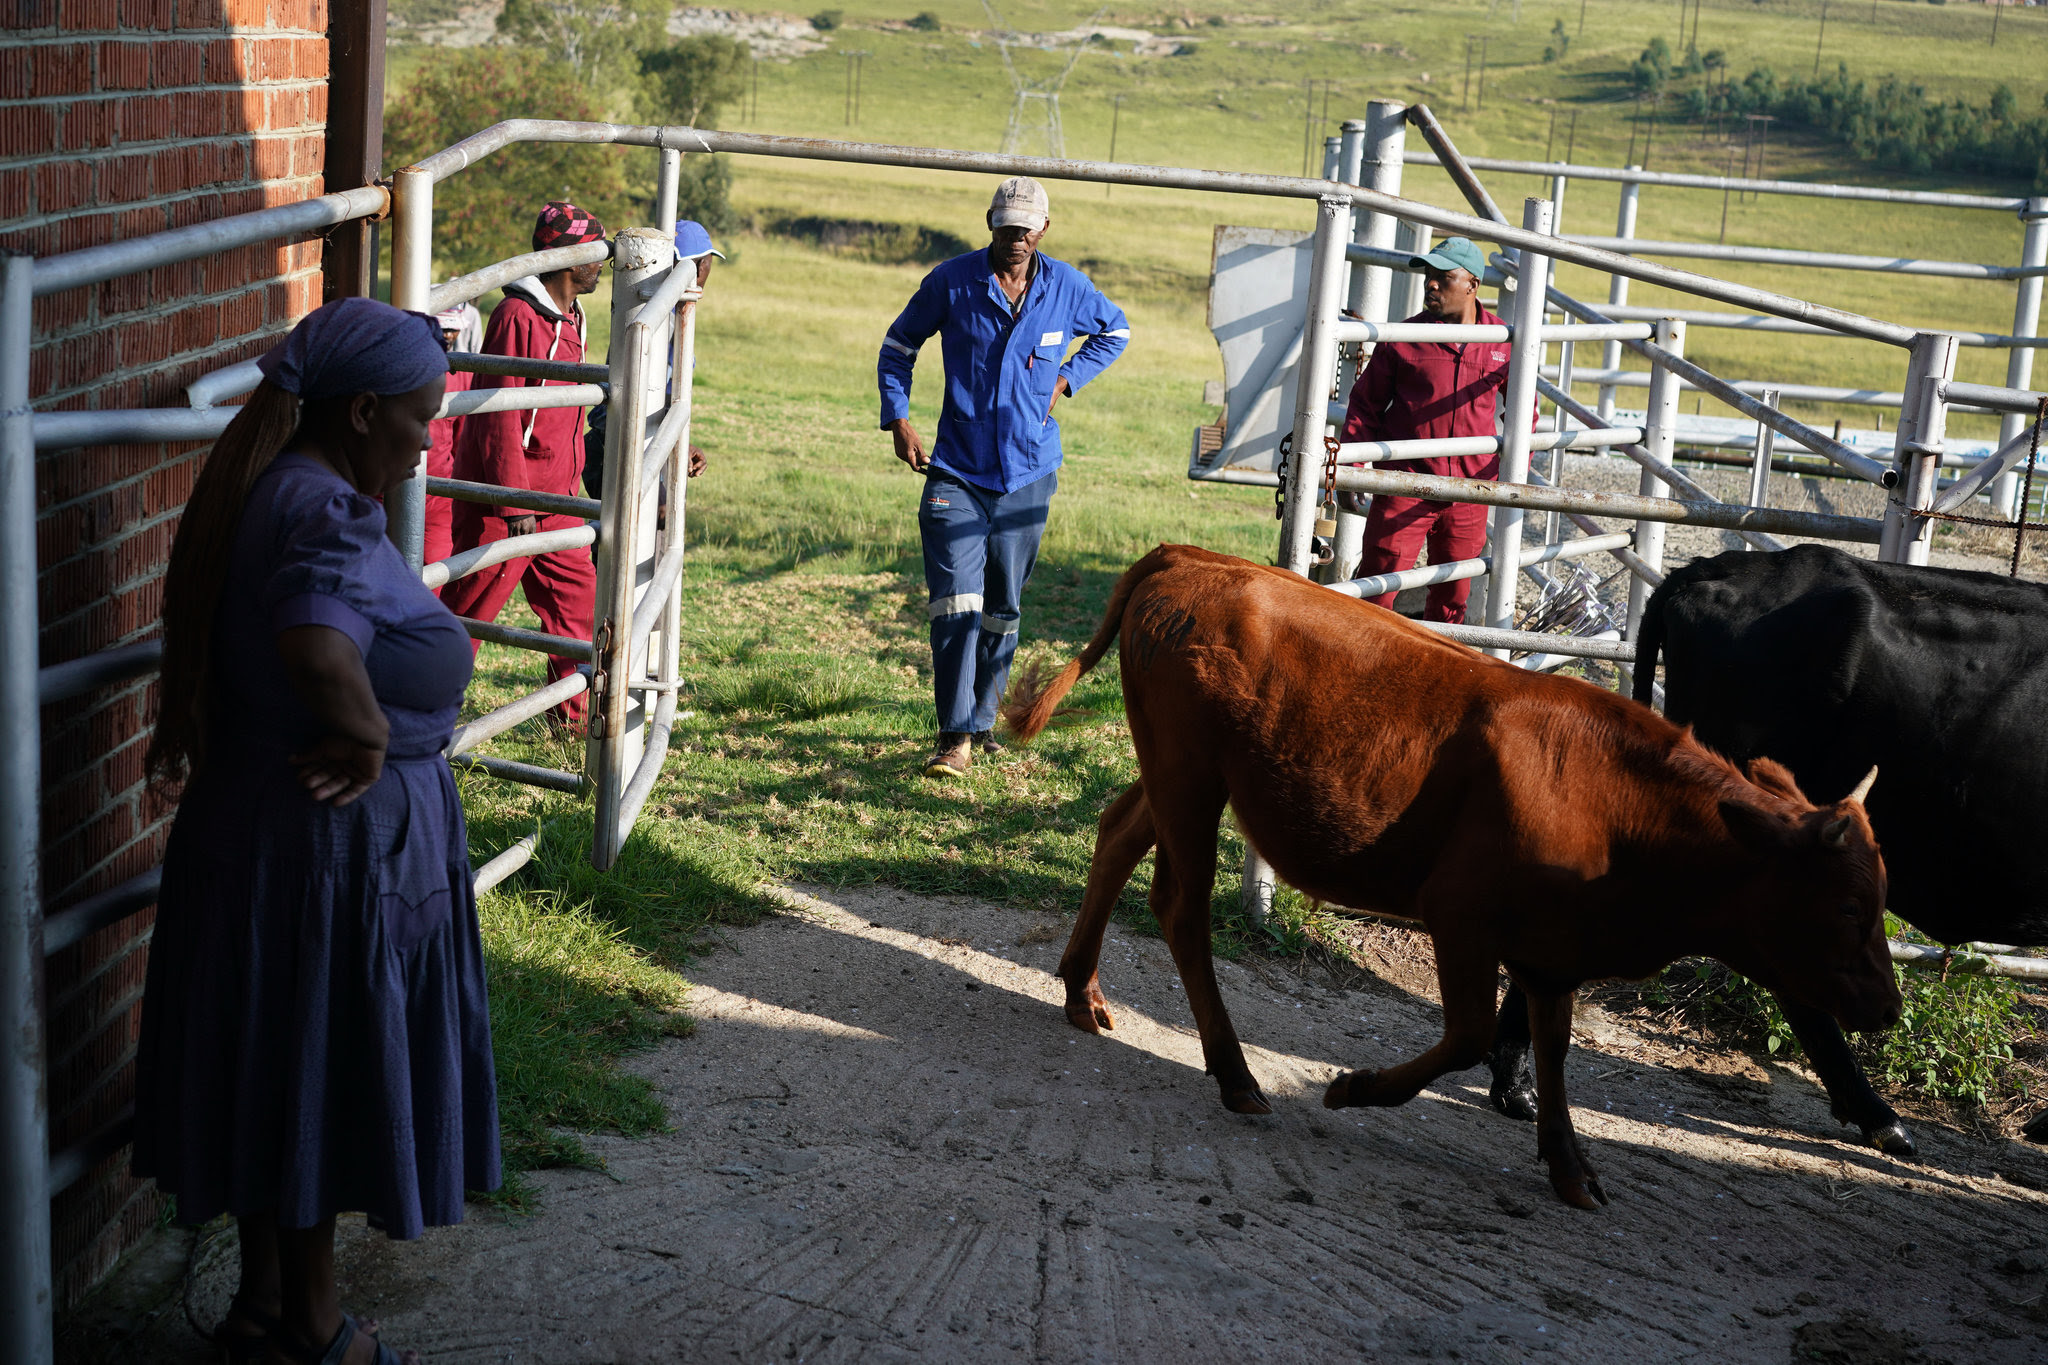 Ephraim Dhlamini arriving with livestock at an auction in Vrede. He said he was suspicious of the dairy farm project from the start. Credit Joao Silva/The New York Times 